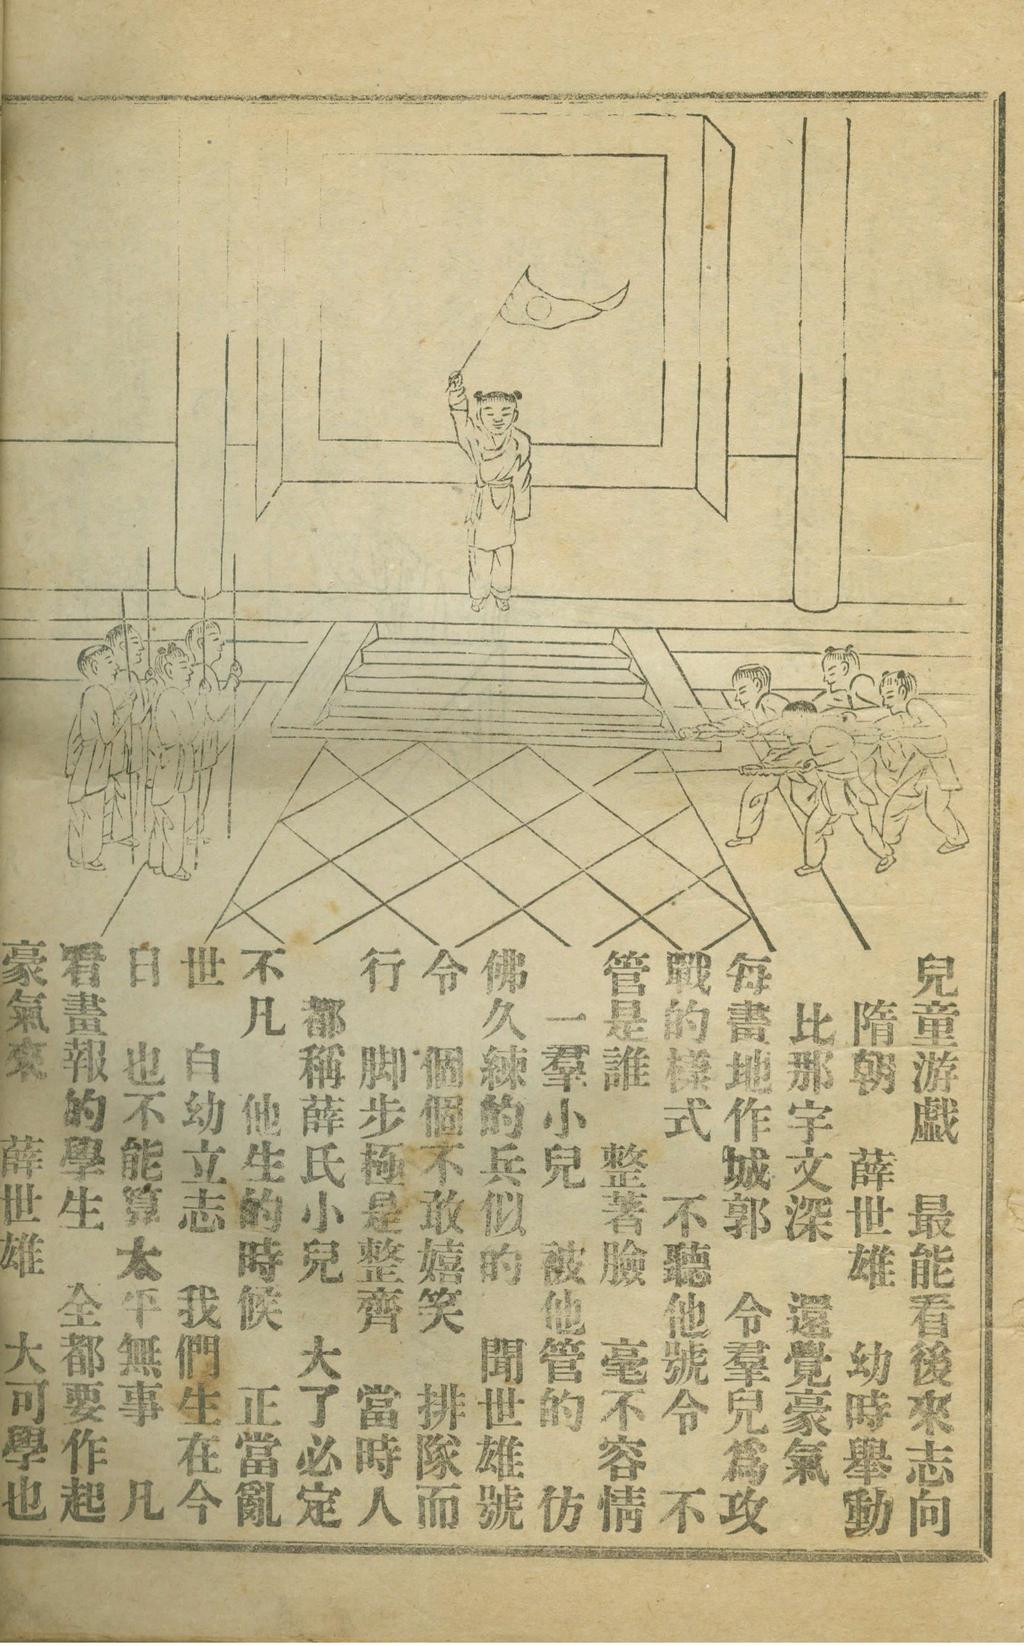 Figure 3.11: The inside page of Qi Meng Hua Ba, 1902 Source: National Library of China, the Exhibit of Modern Children s Literature. http://www.nlc.gov.cn/srwxz/srwxz_2/201302/w020130222381061884931.